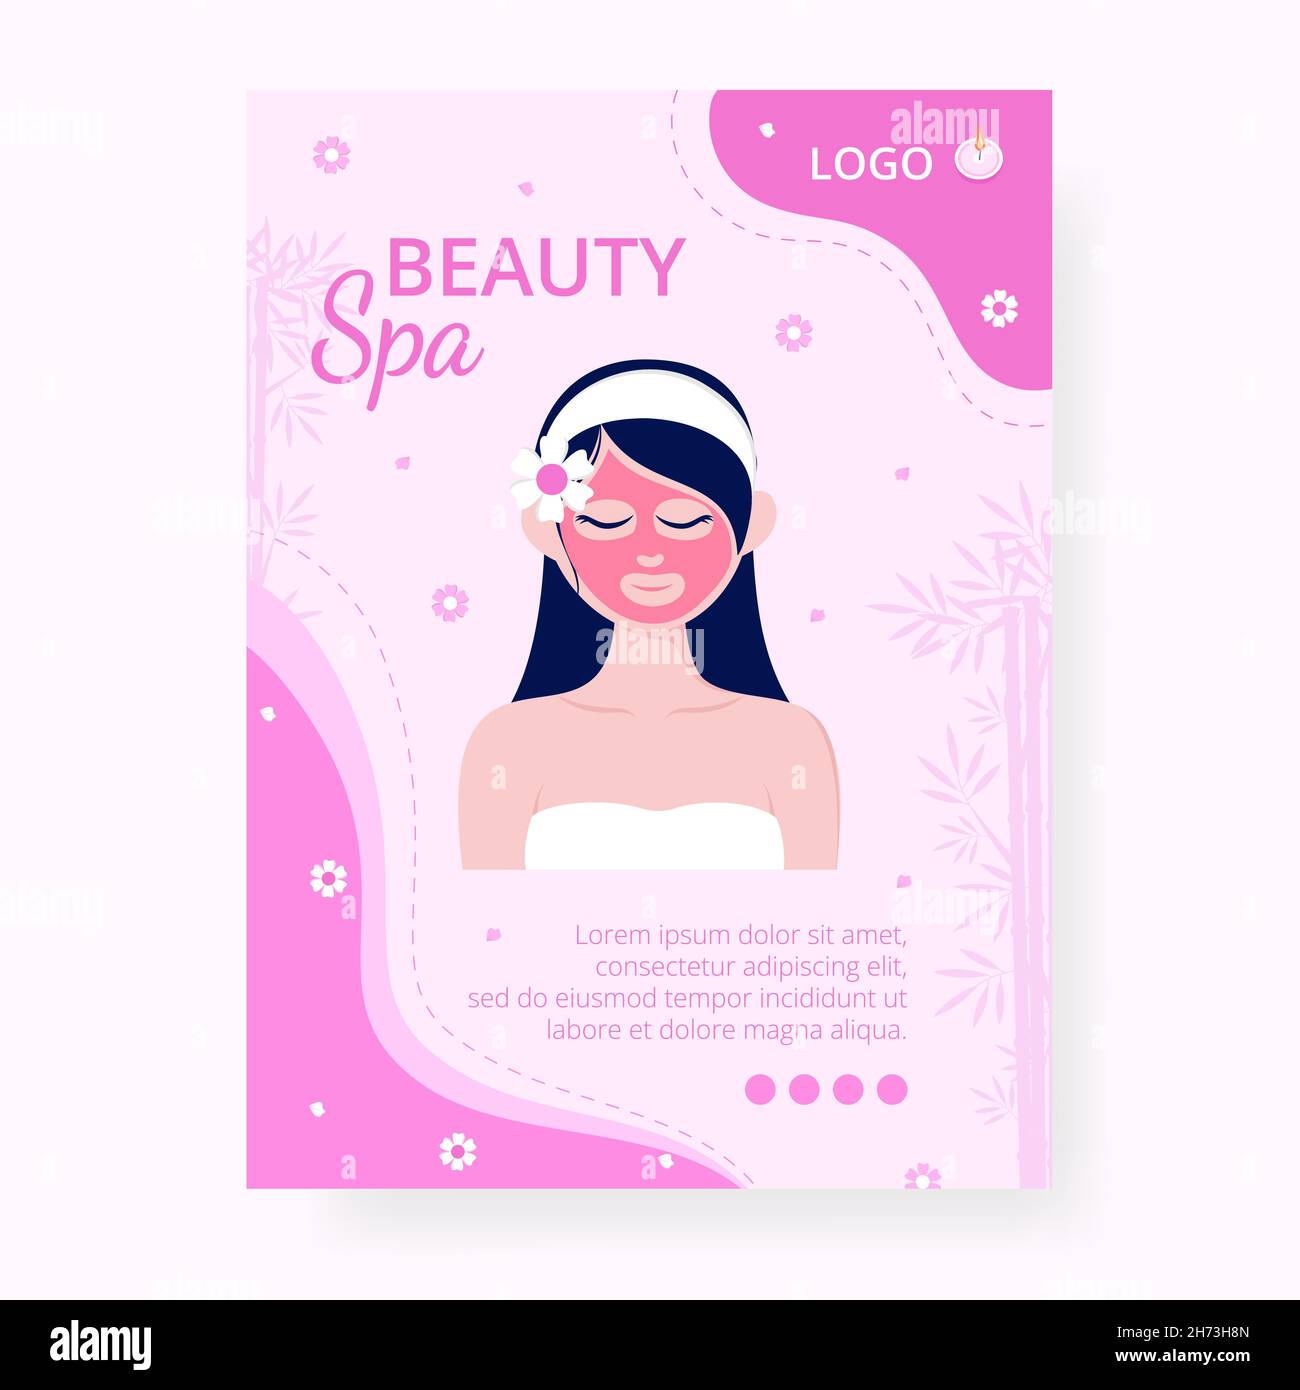 Beauty Spa and Yoga Poster Editable of Square Background Suitable for Social Media, Feed, Card, Greetings, Print and Web Internet Ads Stock Vector